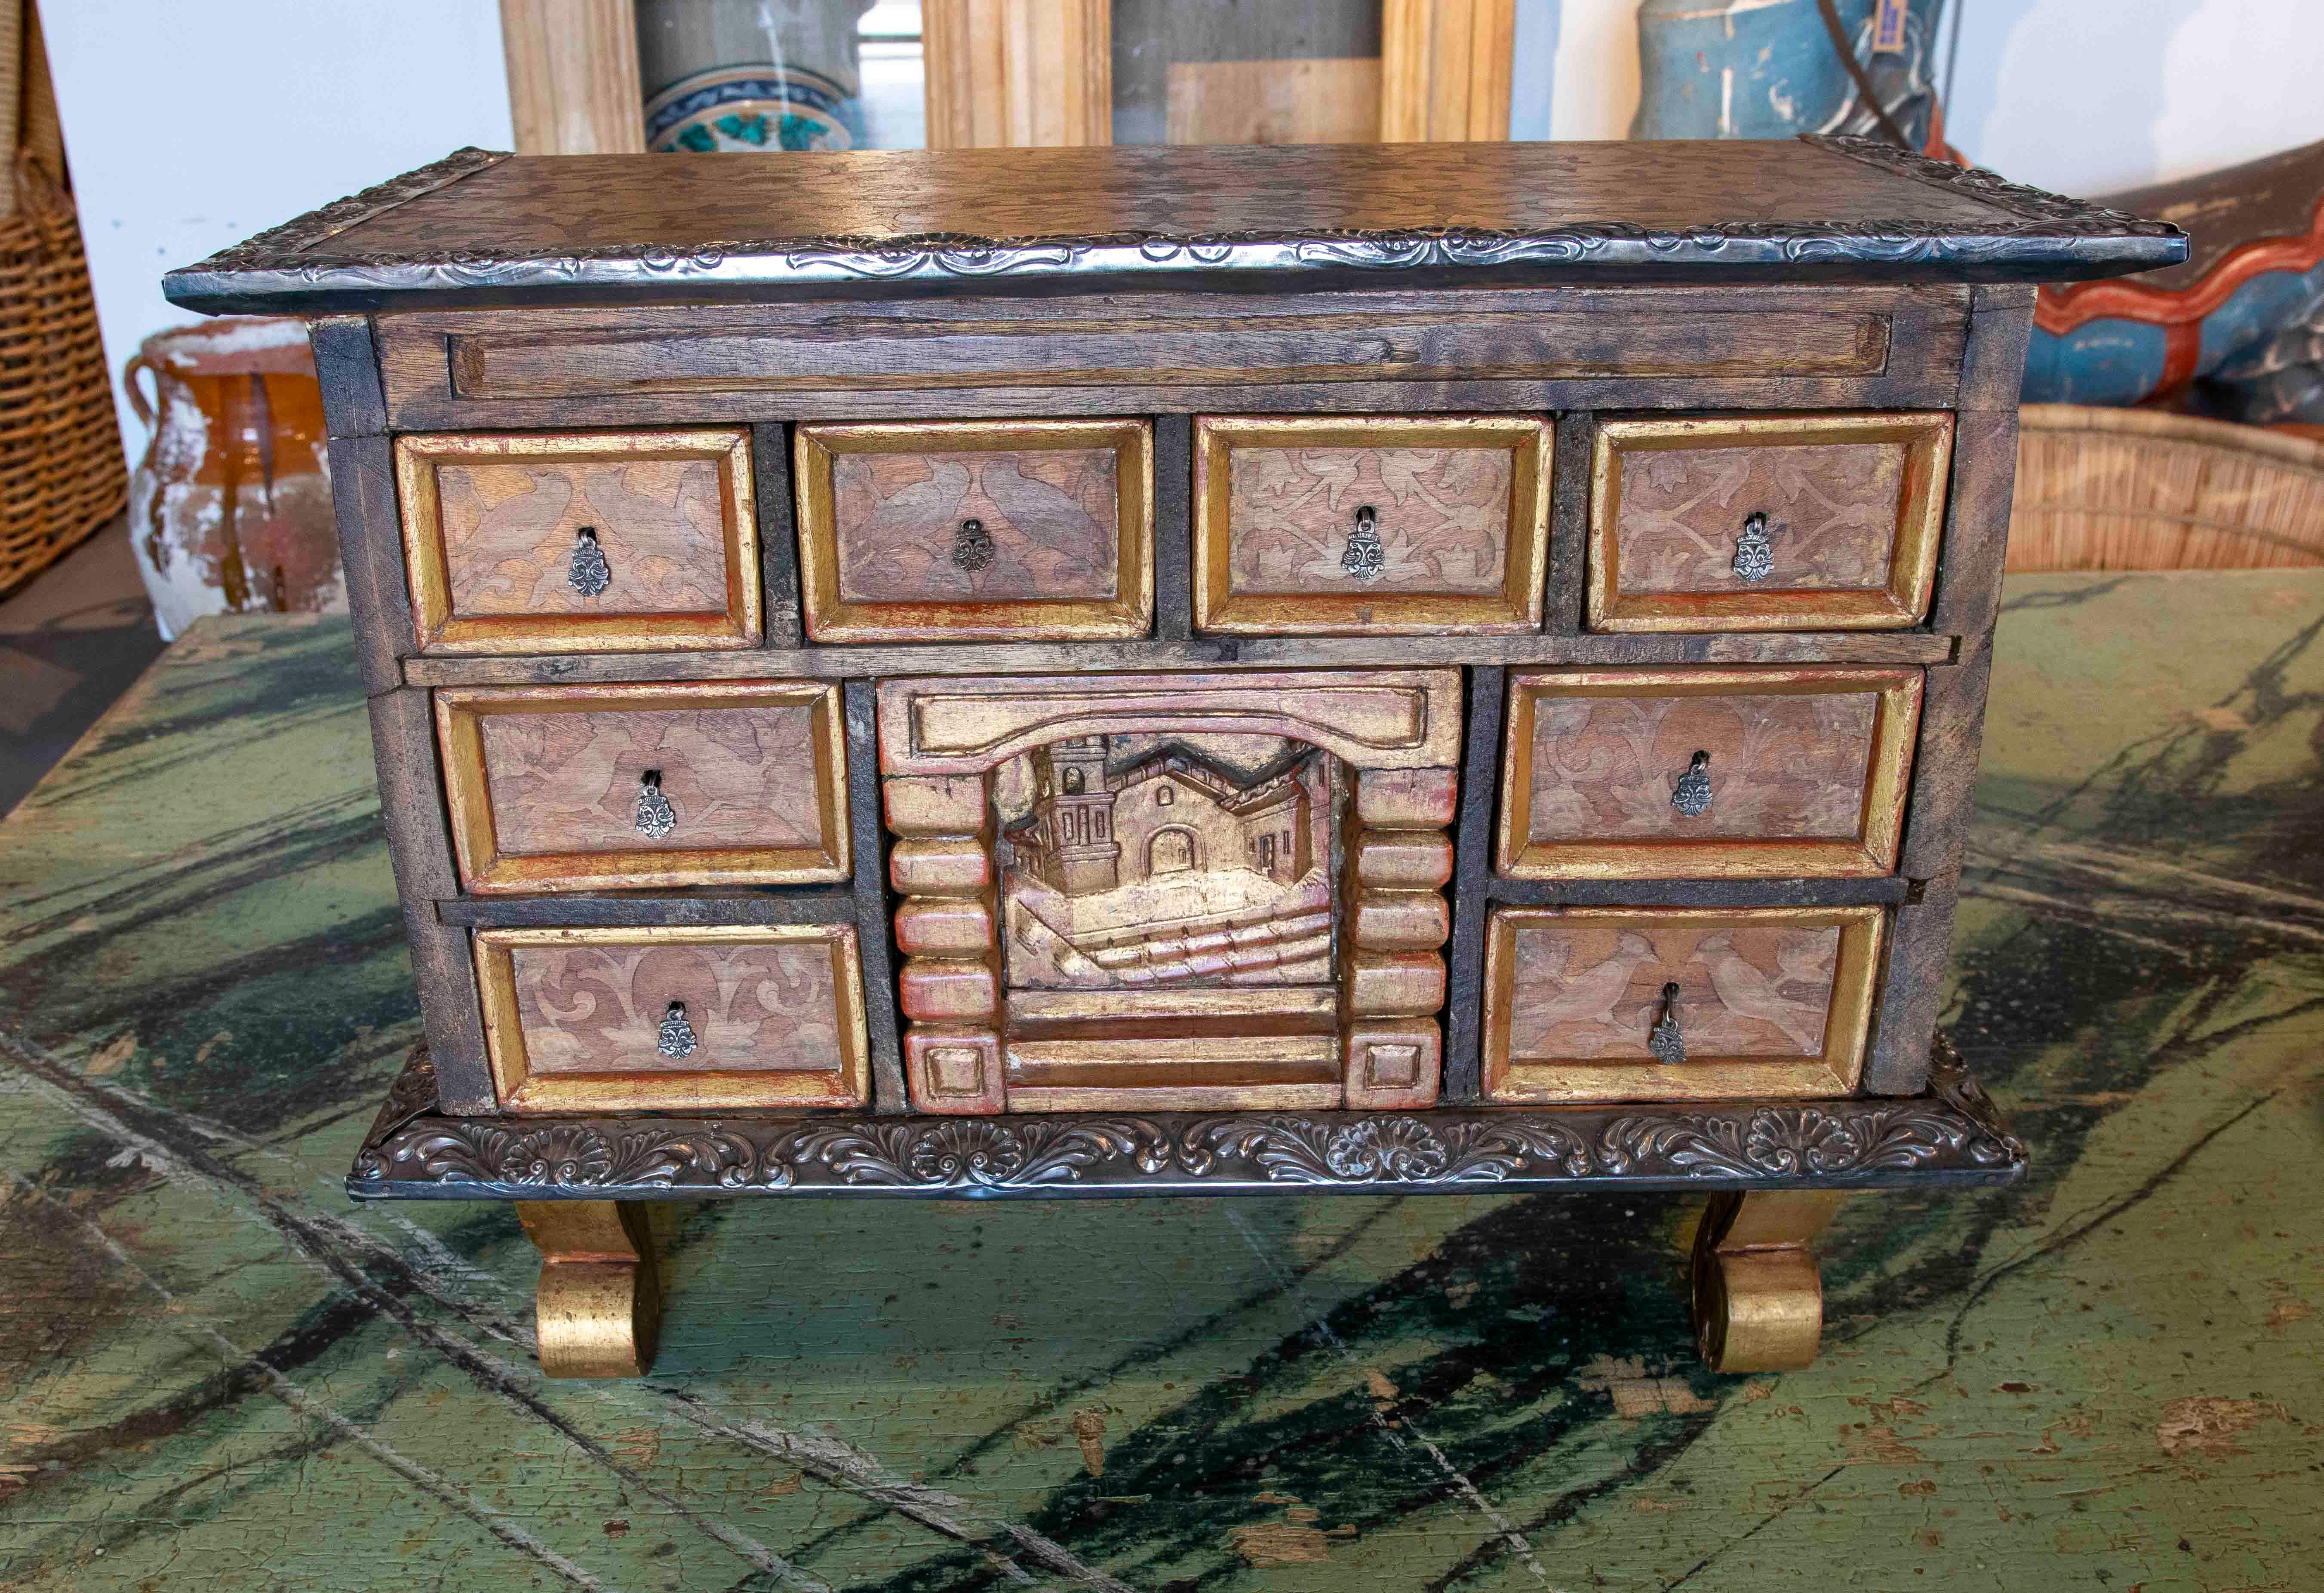 19th century Mexican Polychromed Metal Chest with Drawers and Decorations.